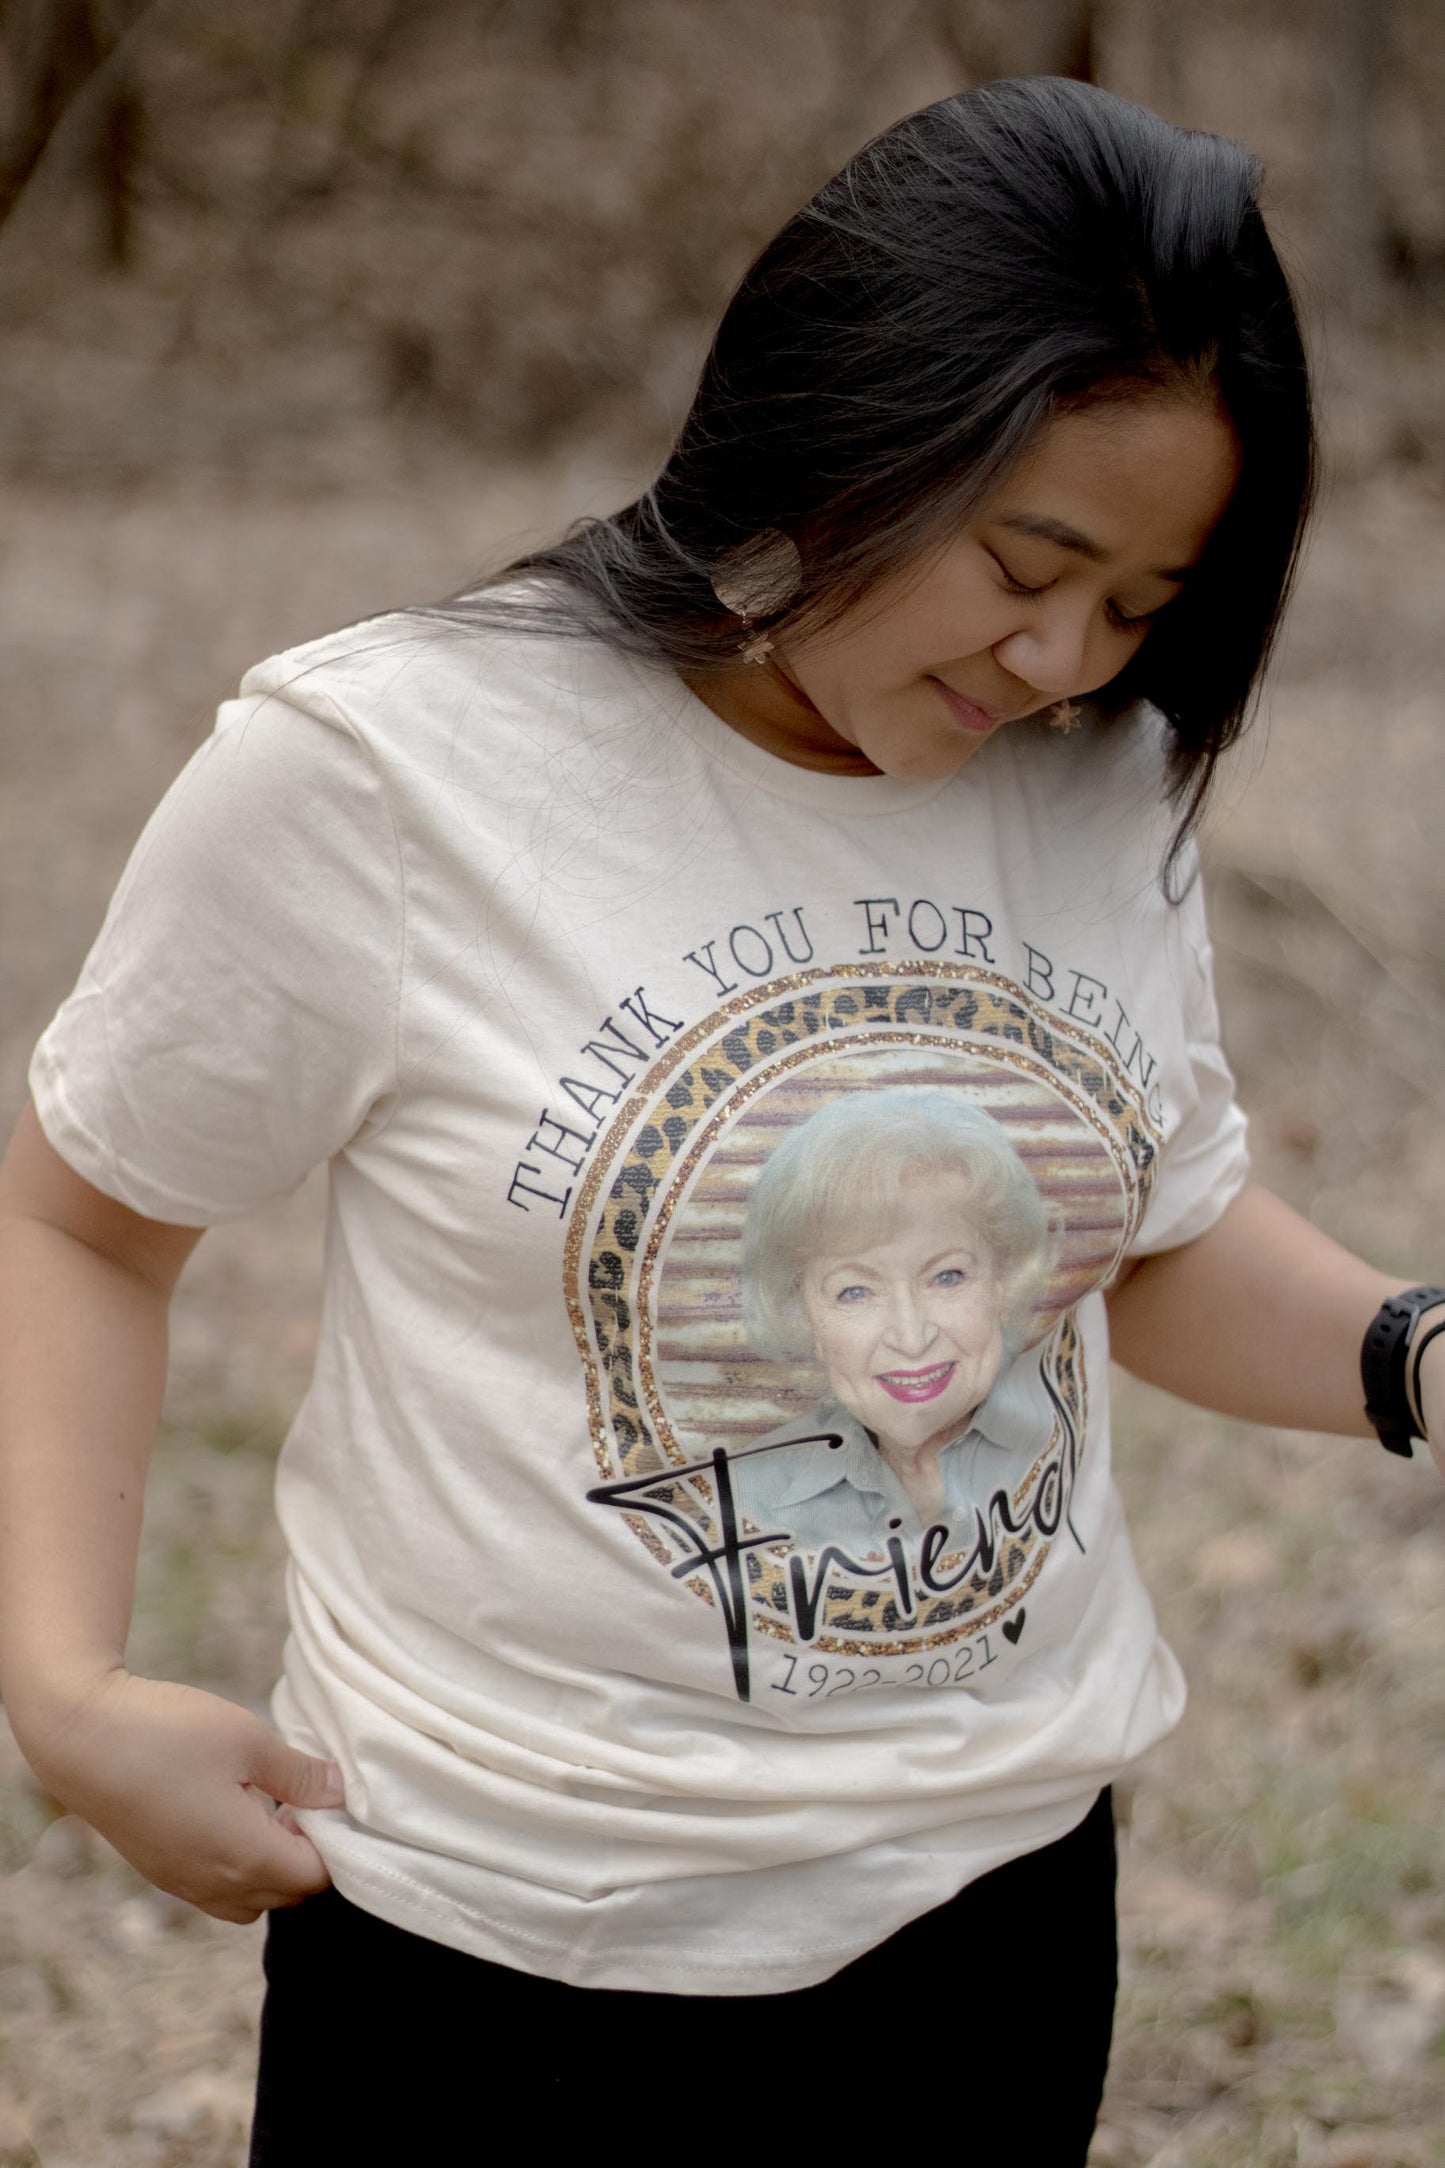 Thank You For Being A Friend - Betty White Graphic Tee